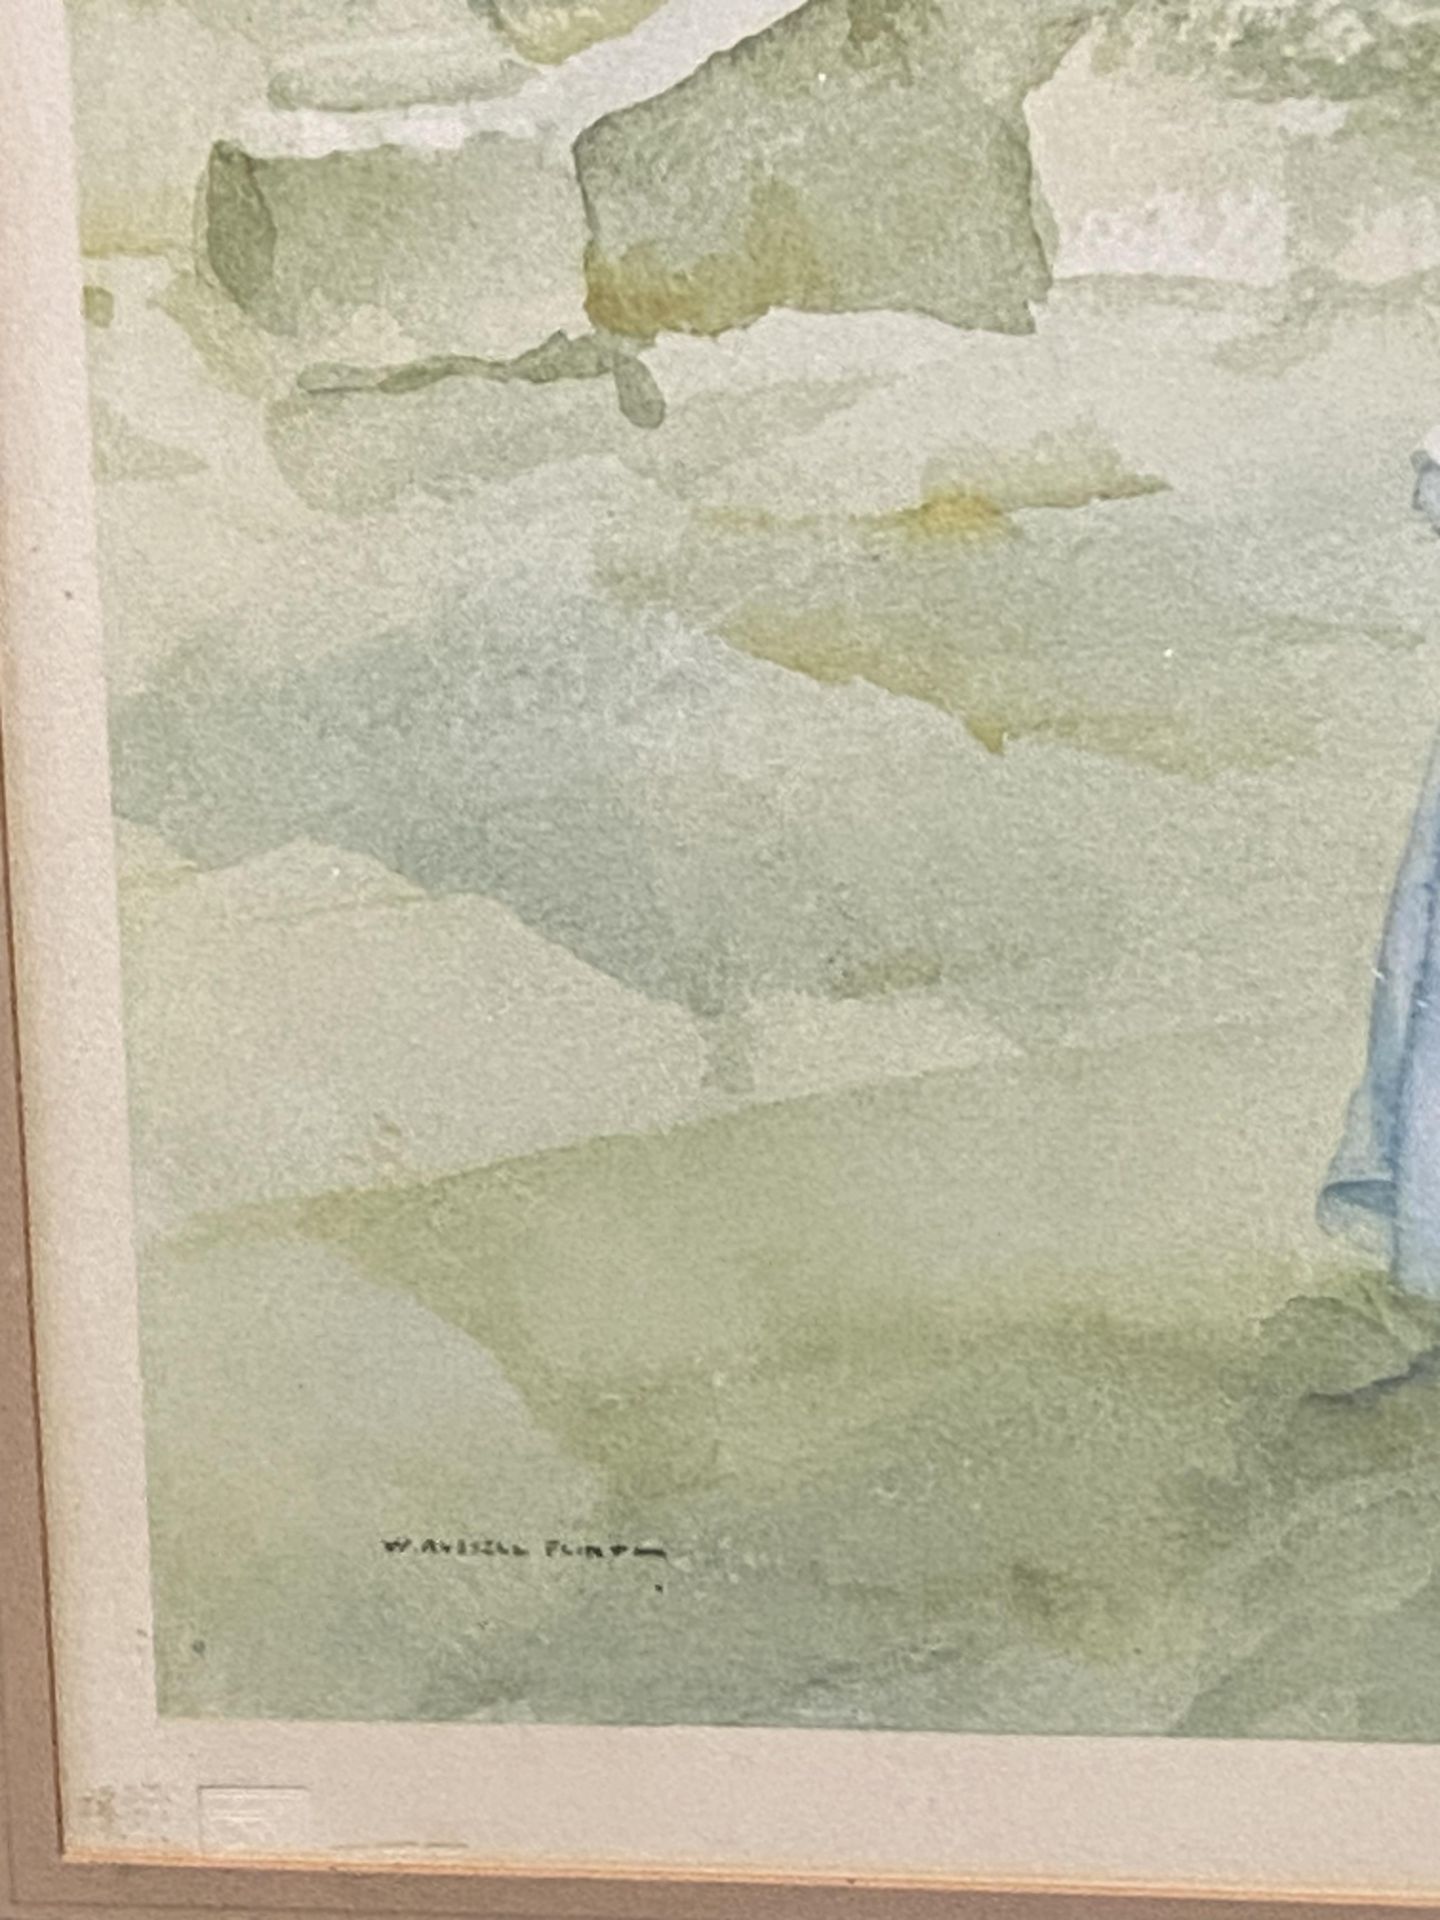 Framed and glazed print by Sir William Russell Flint - Image 3 of 4